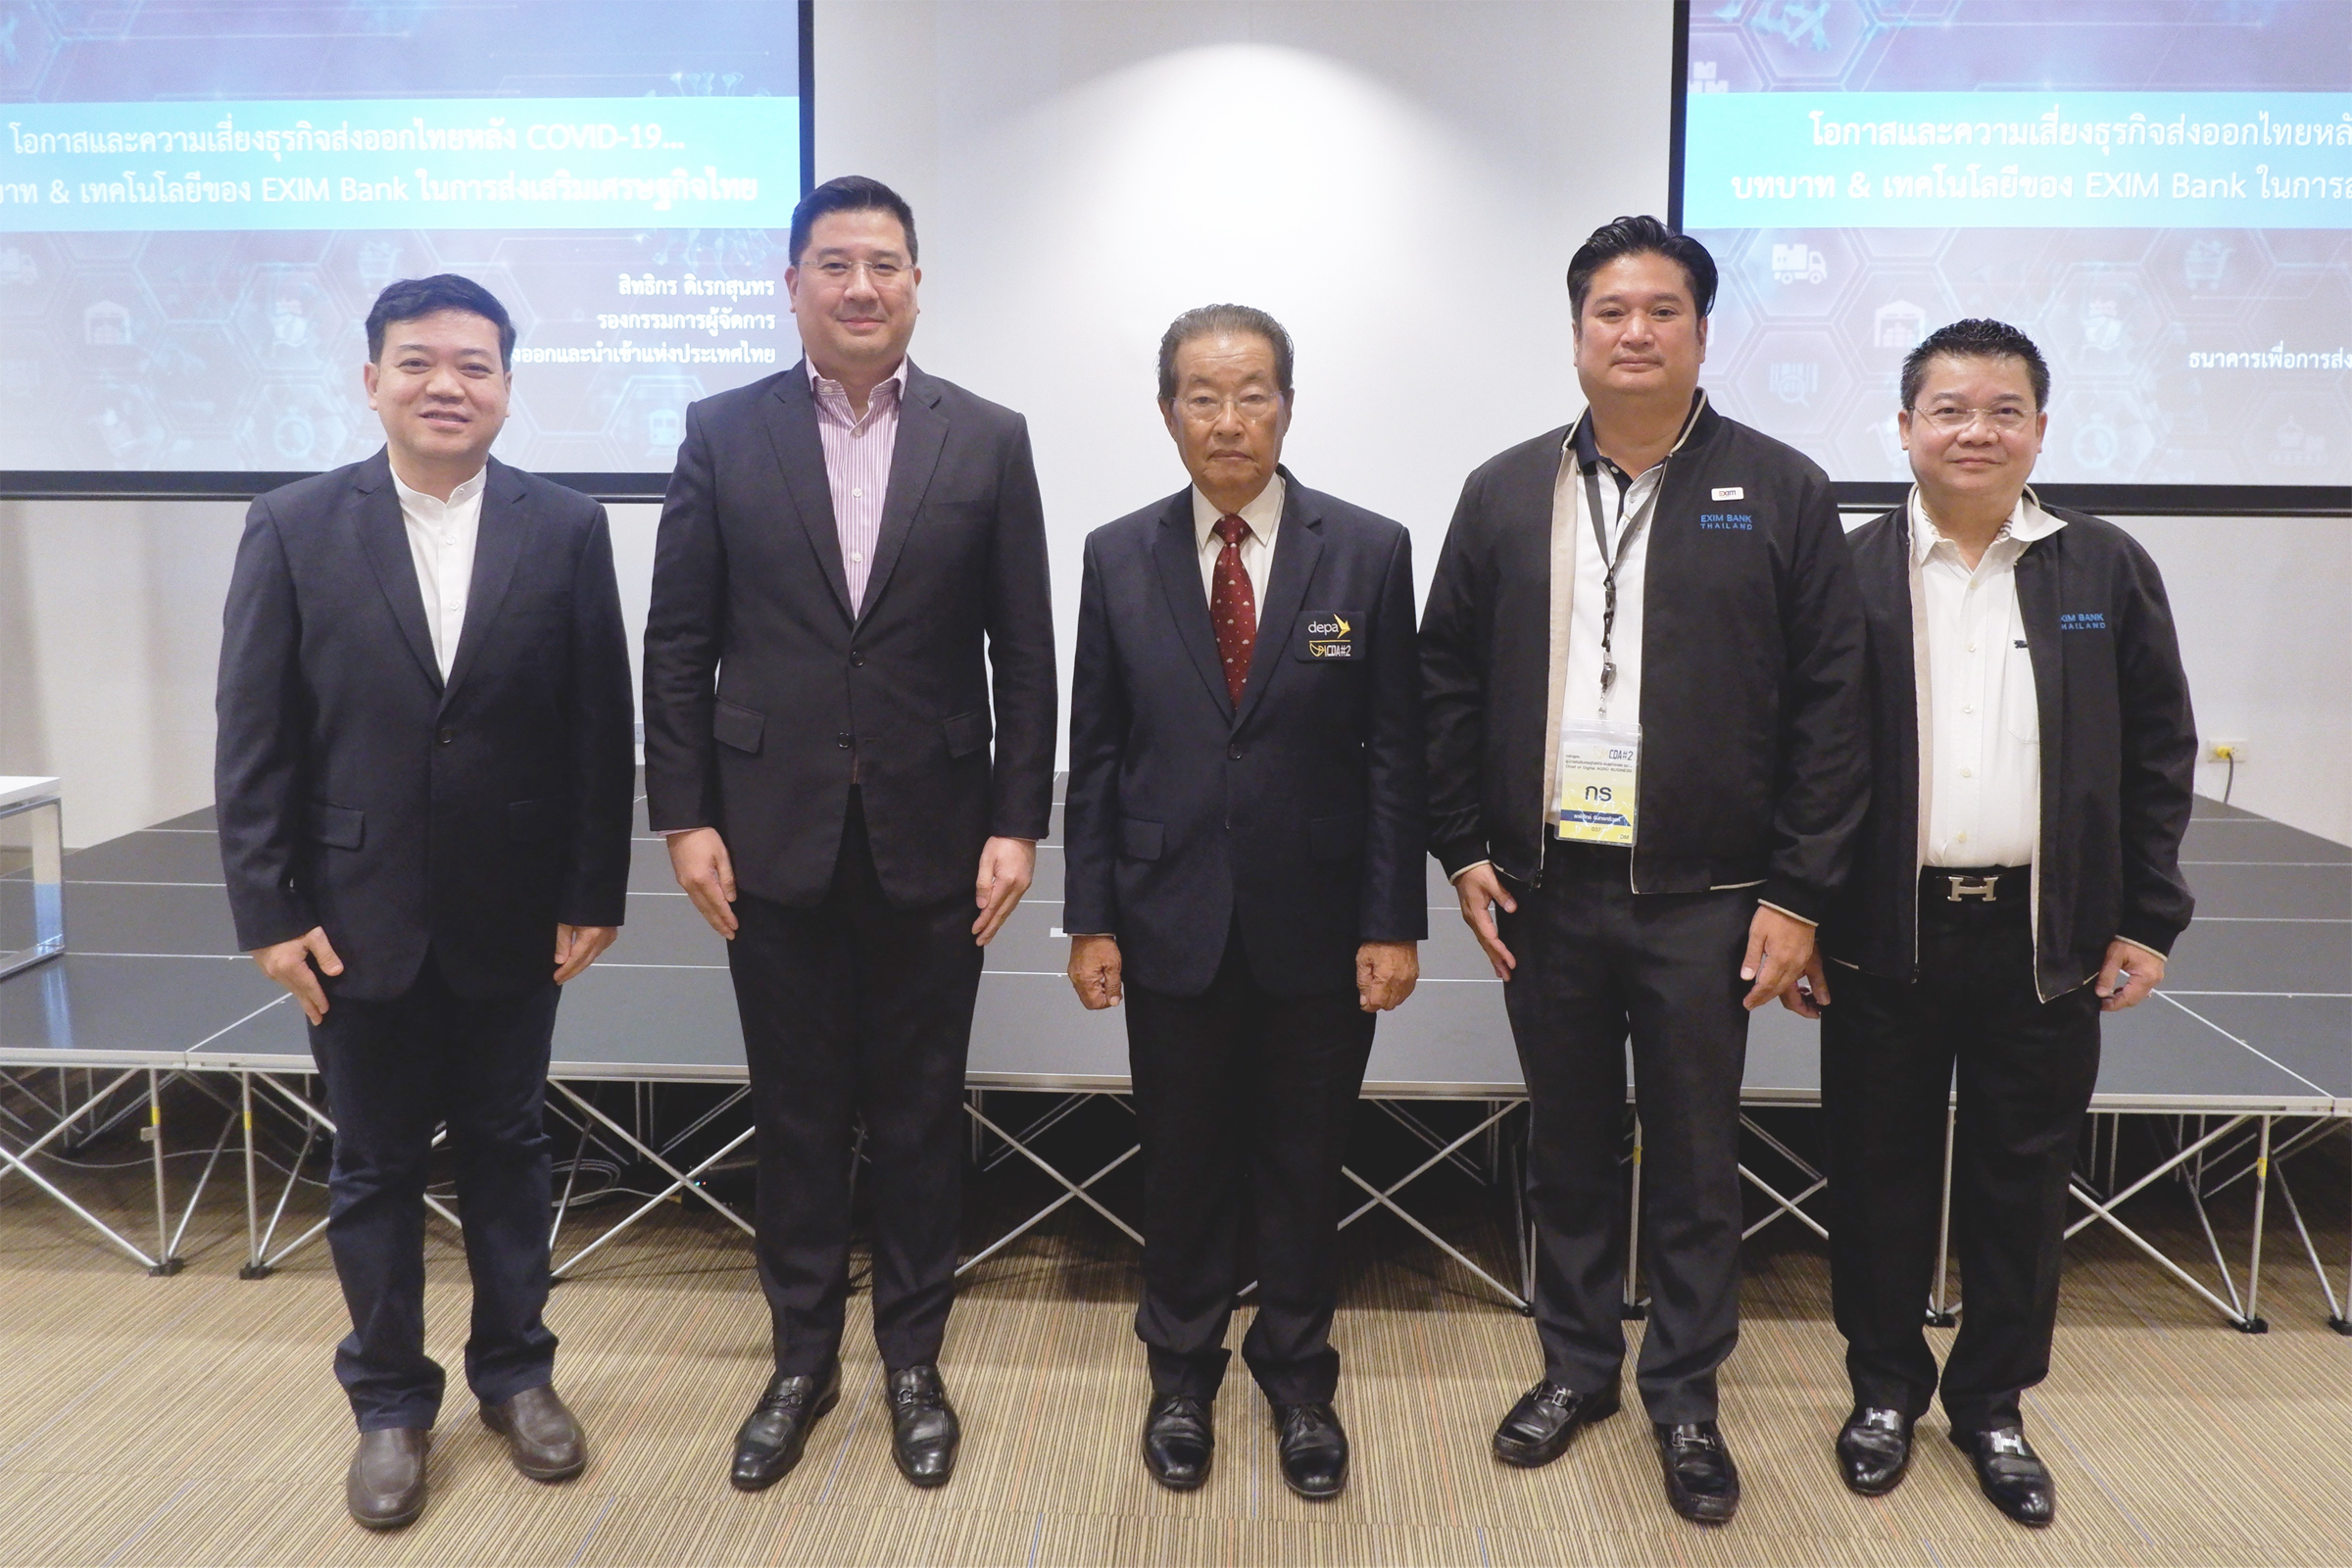 EXIM Thailand Joins as Guest Speaker for Chief of Digital Agro Business Program